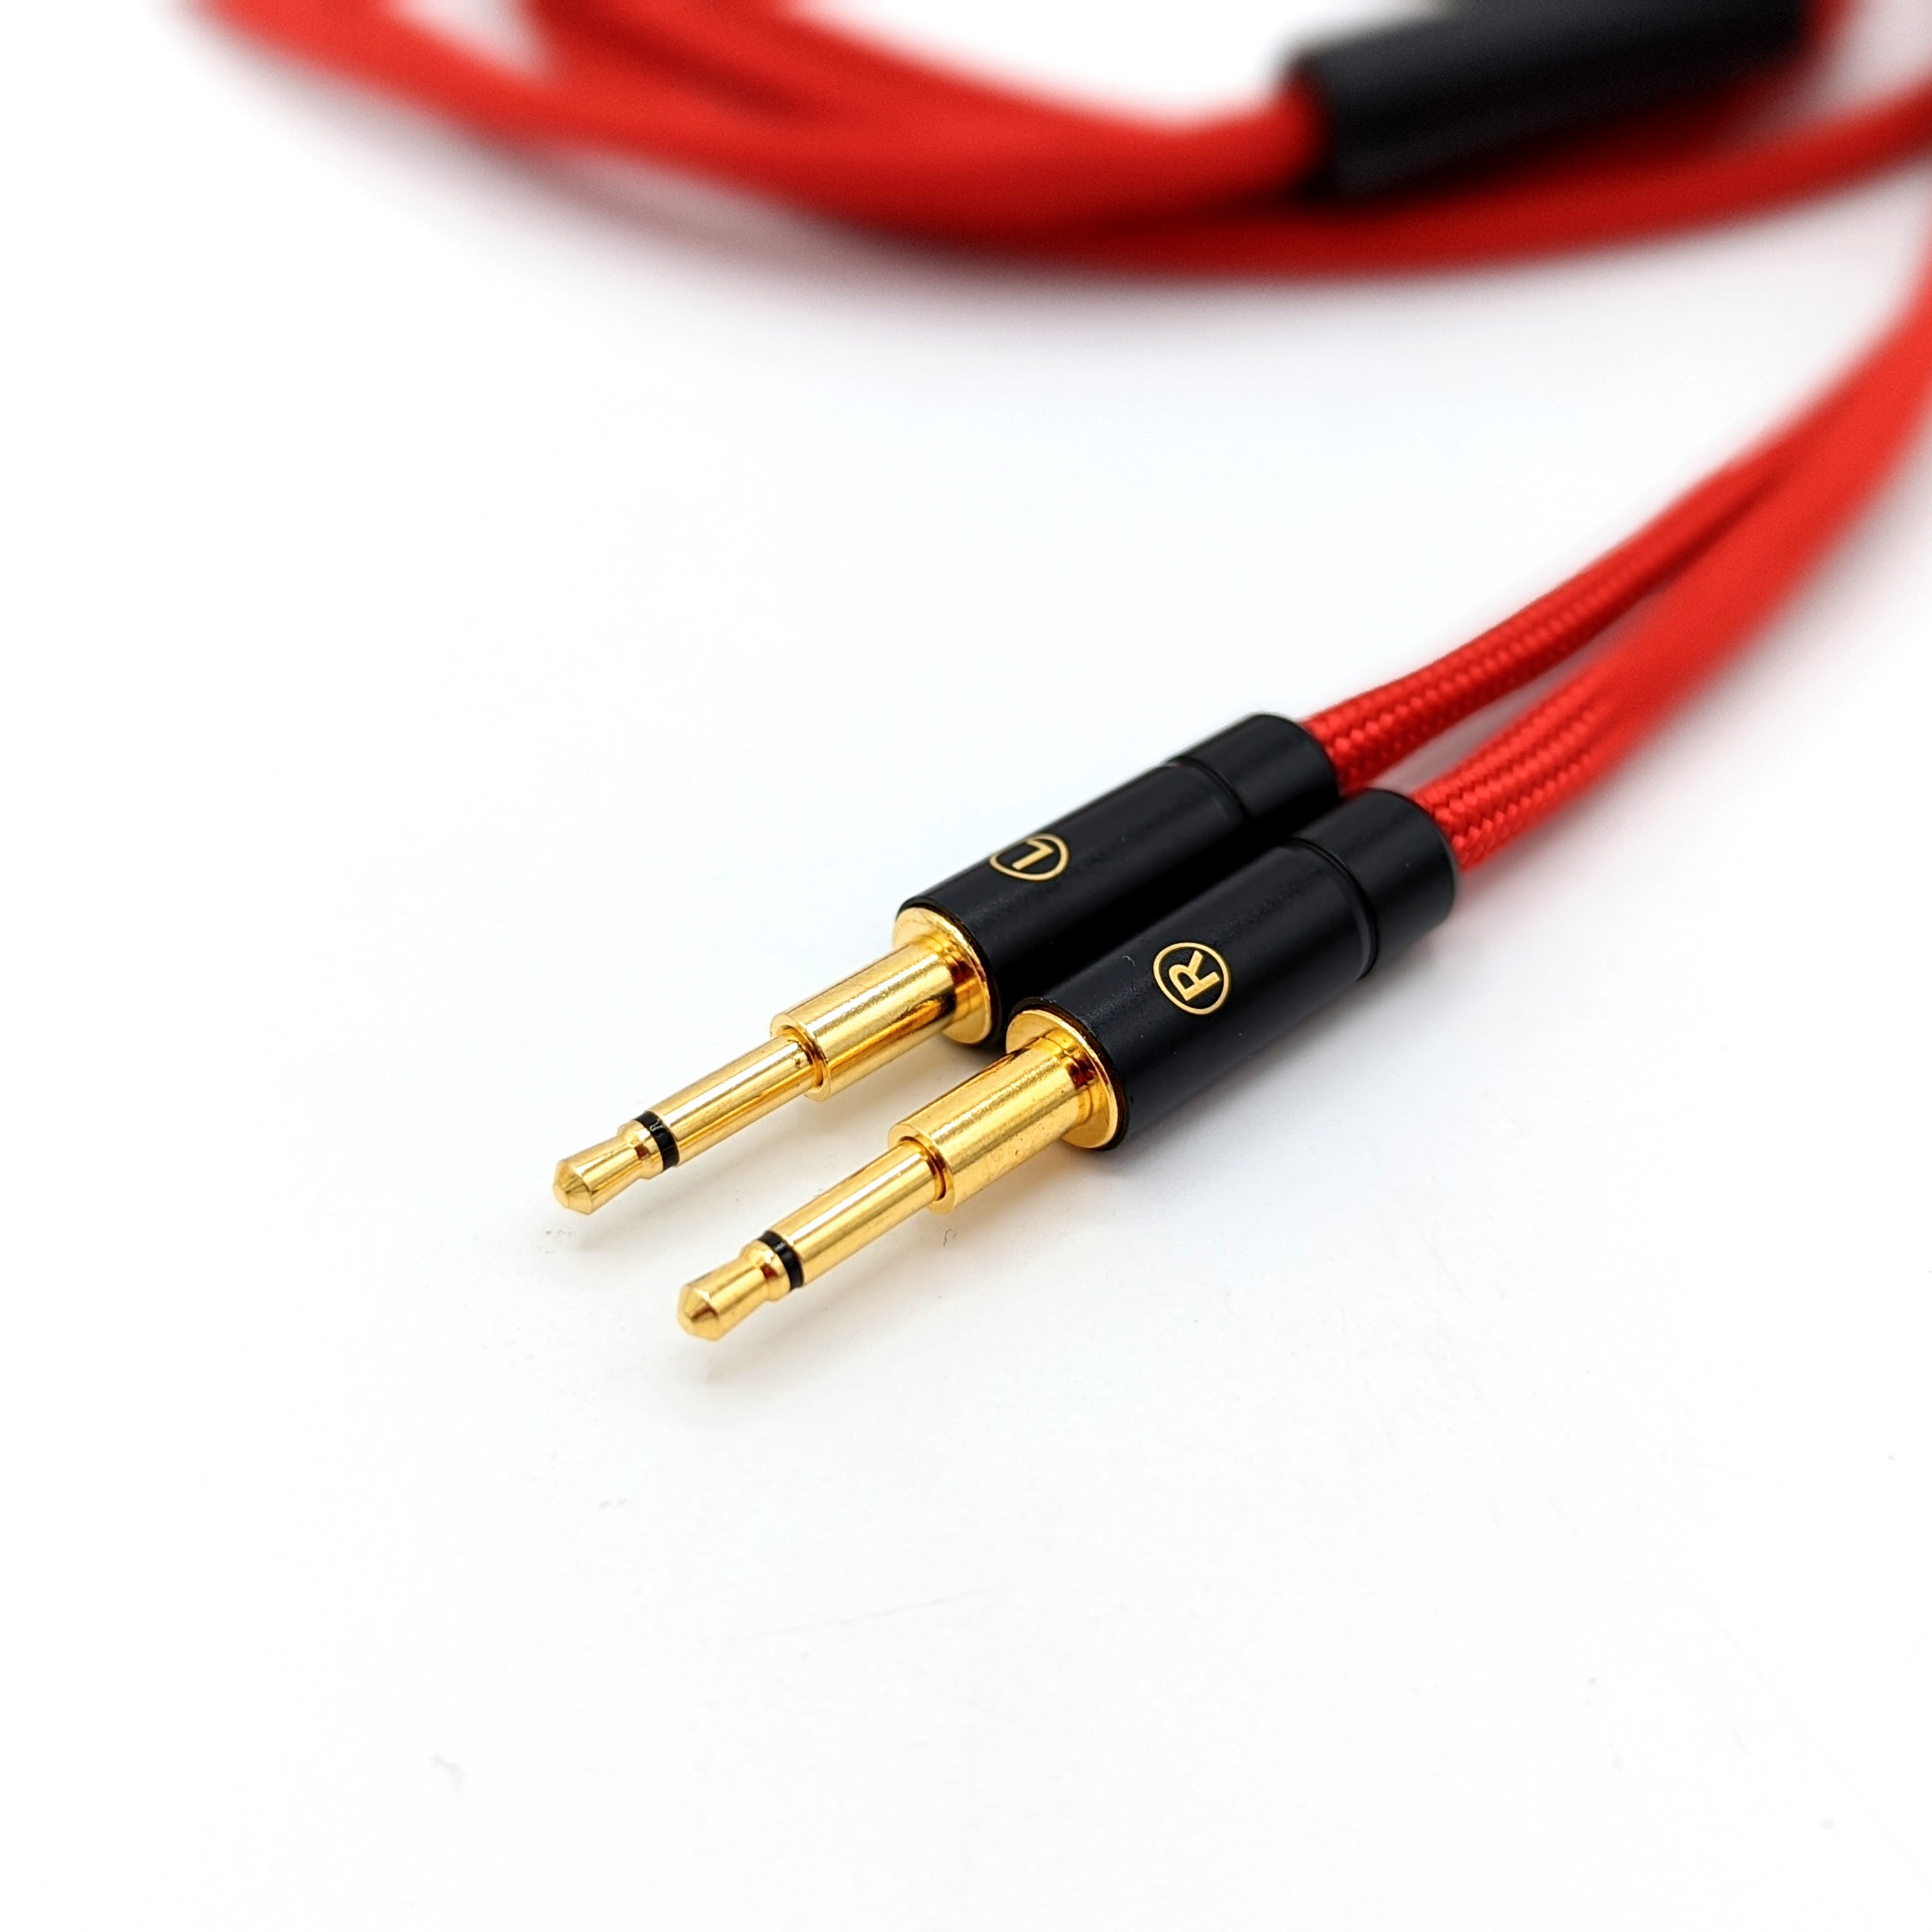 CST-HC-7-L: Dual 2.5mm Balanced Headphone Cable for HD700, Emu Teak and more